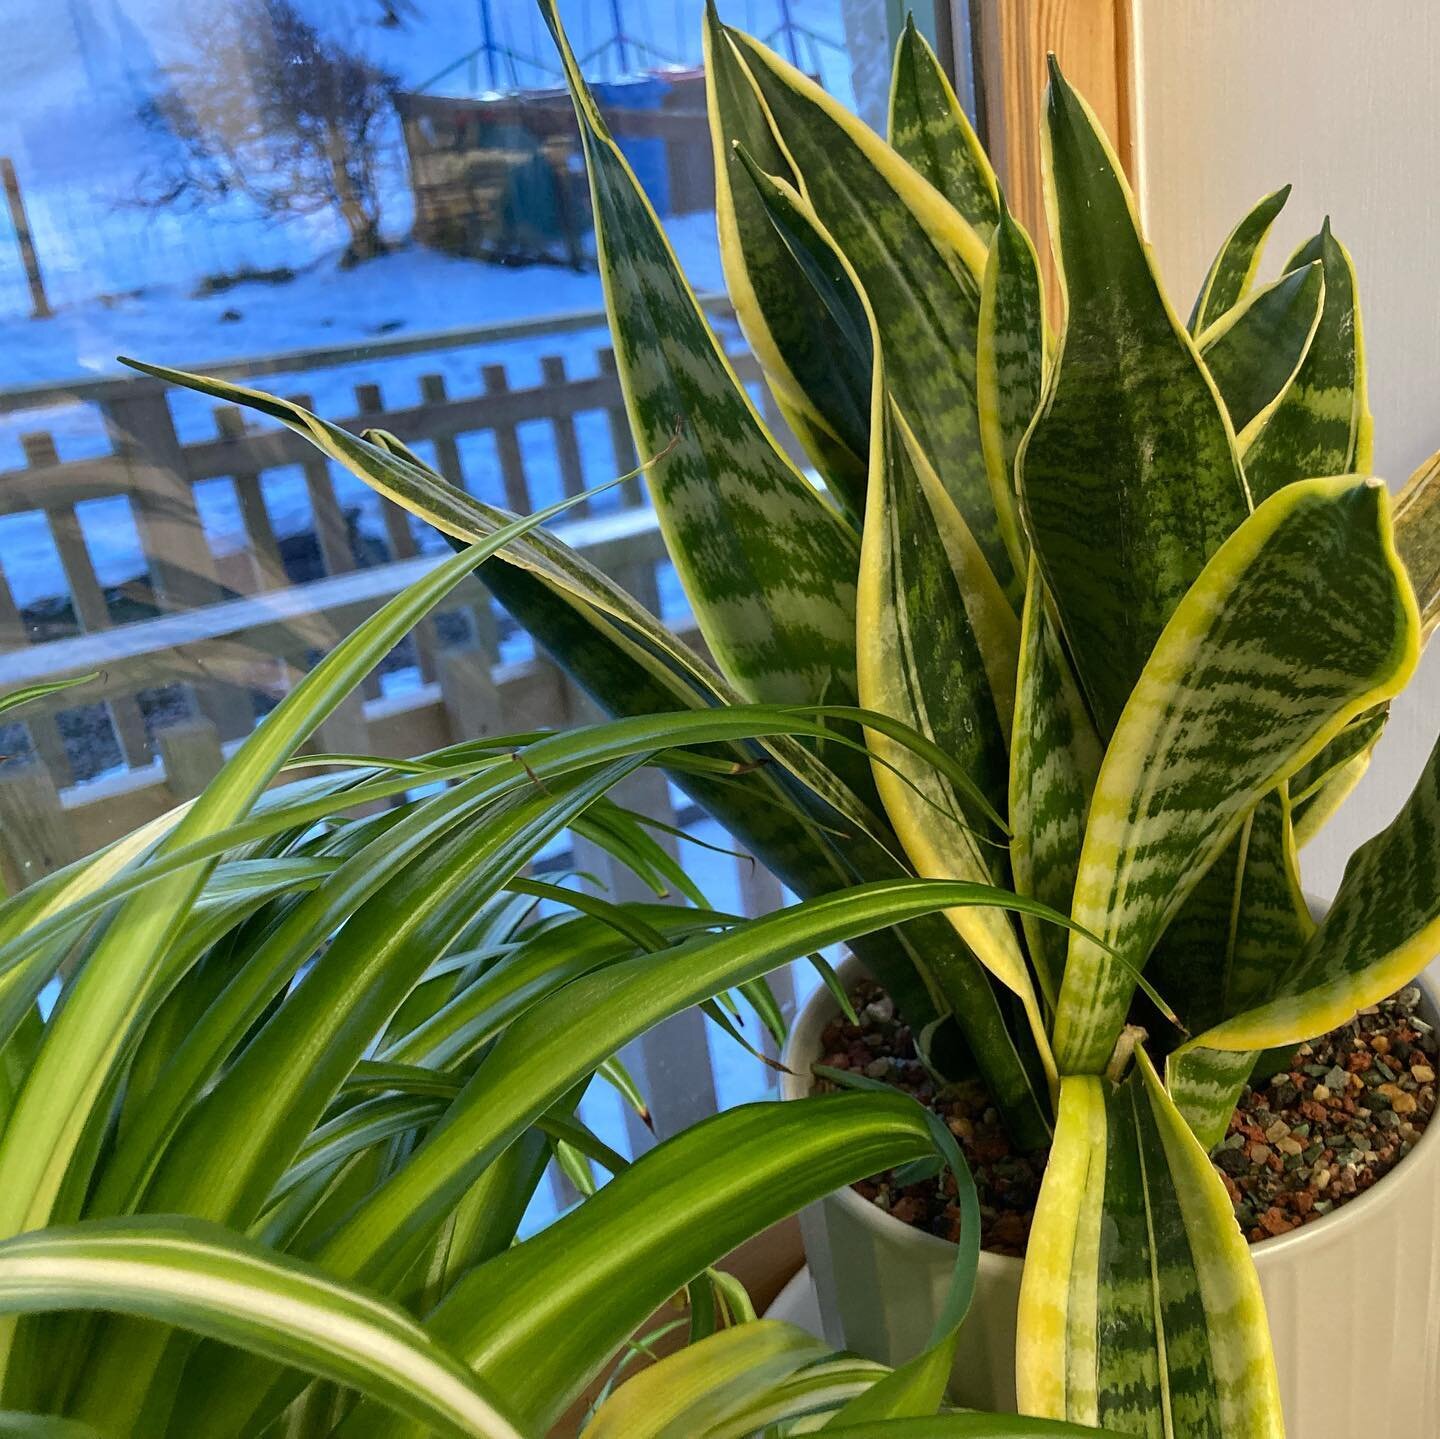 We love a bit of greenery here at Gneiss Things, it really lifts the spirit and brightens our surroundings.

So we are glad to see our studio plants thriving even in the Hebridean winter.

We hope to be able to open our space to visitors again soon b